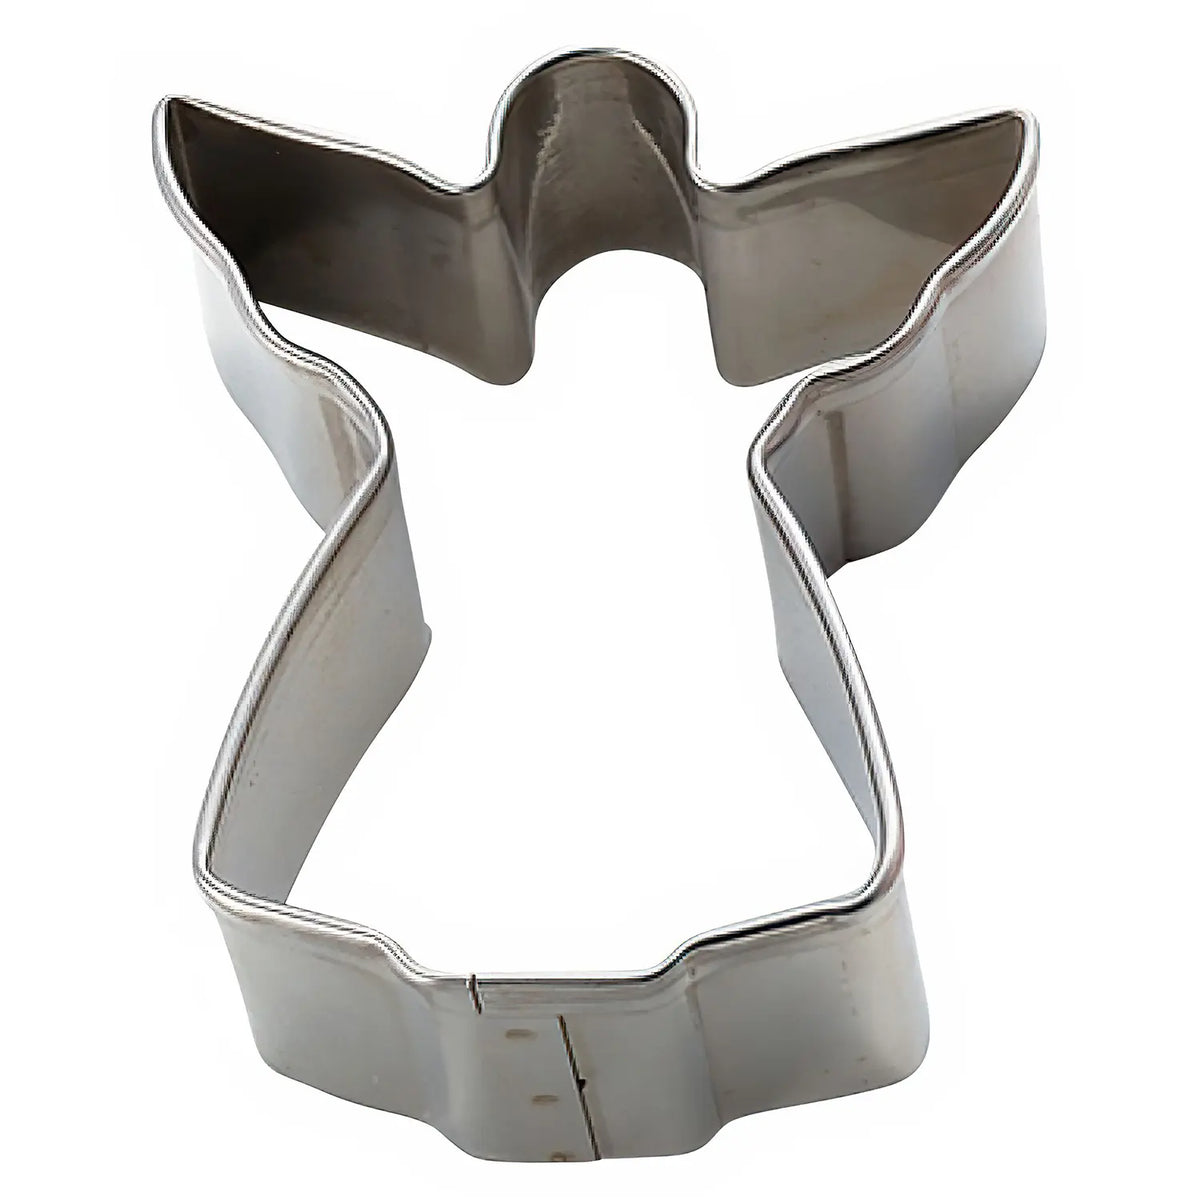 TIGERCROWN Cake Land Stainless Steel Cookie Cutter Angel